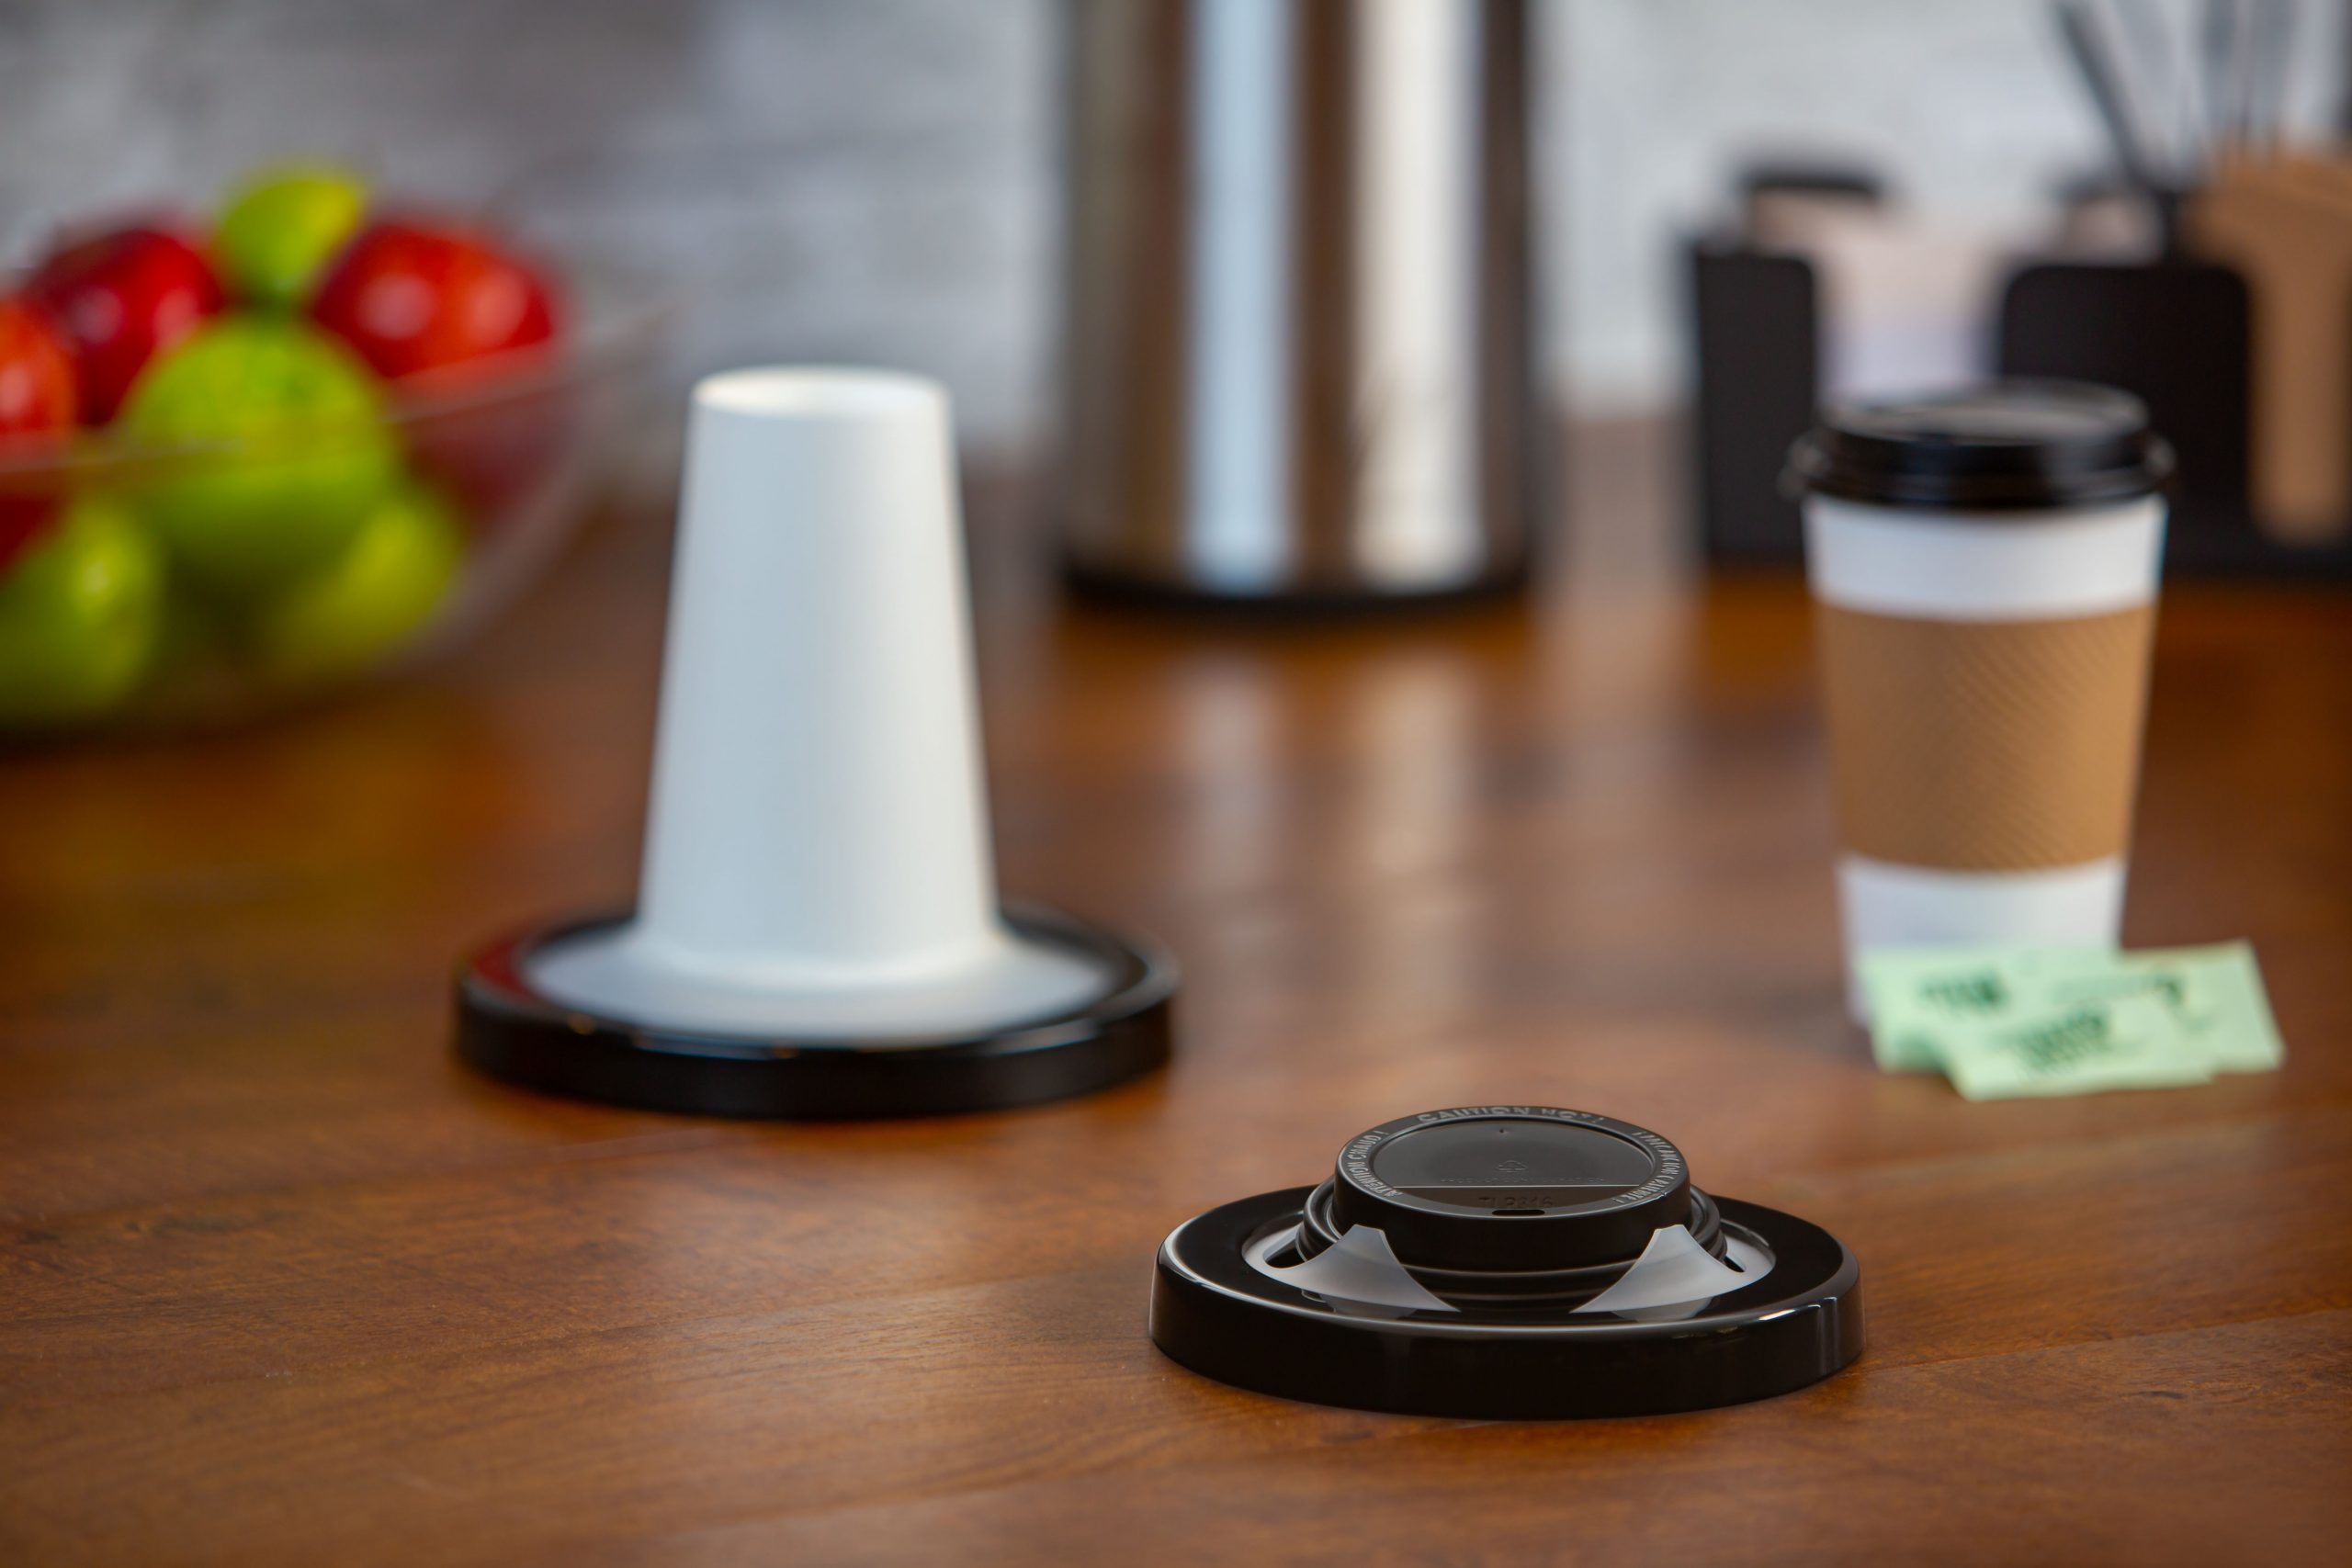 No fuss hot lid dispensers keep counters tidy